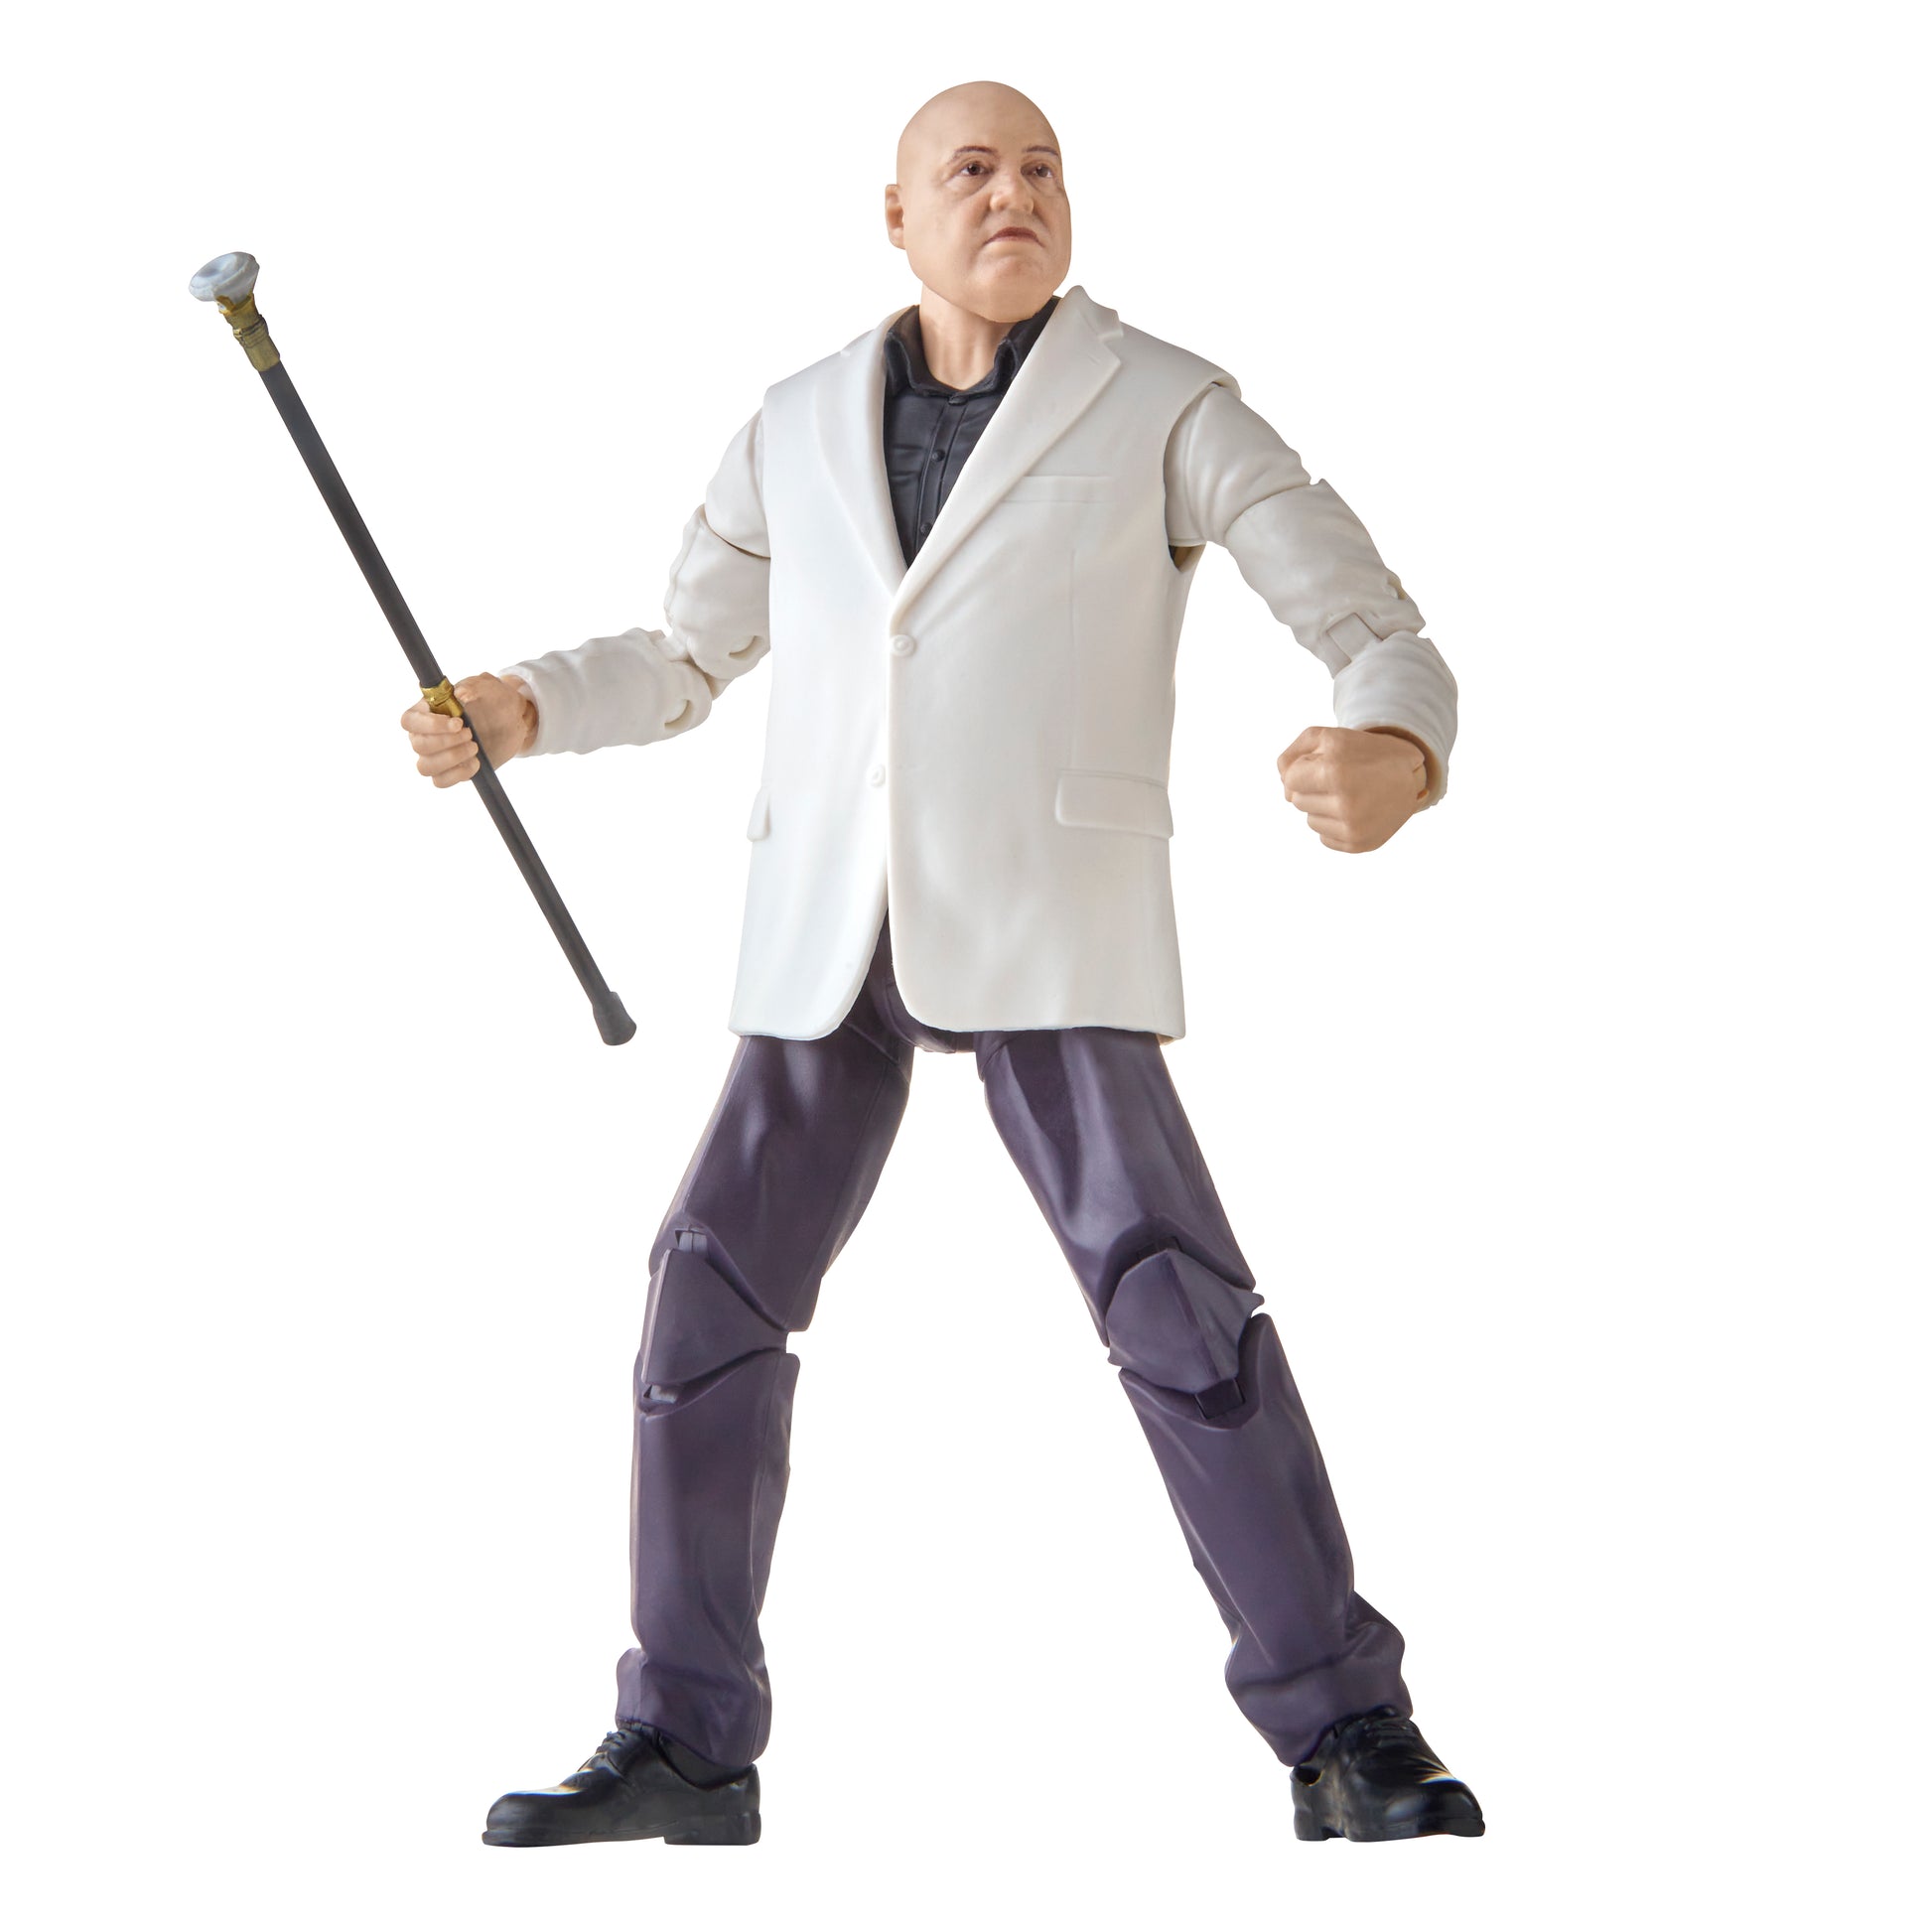 Hasbro Marvel Legends Series Kingpin Action Figure 6-Inch Toy - heretoserveyou